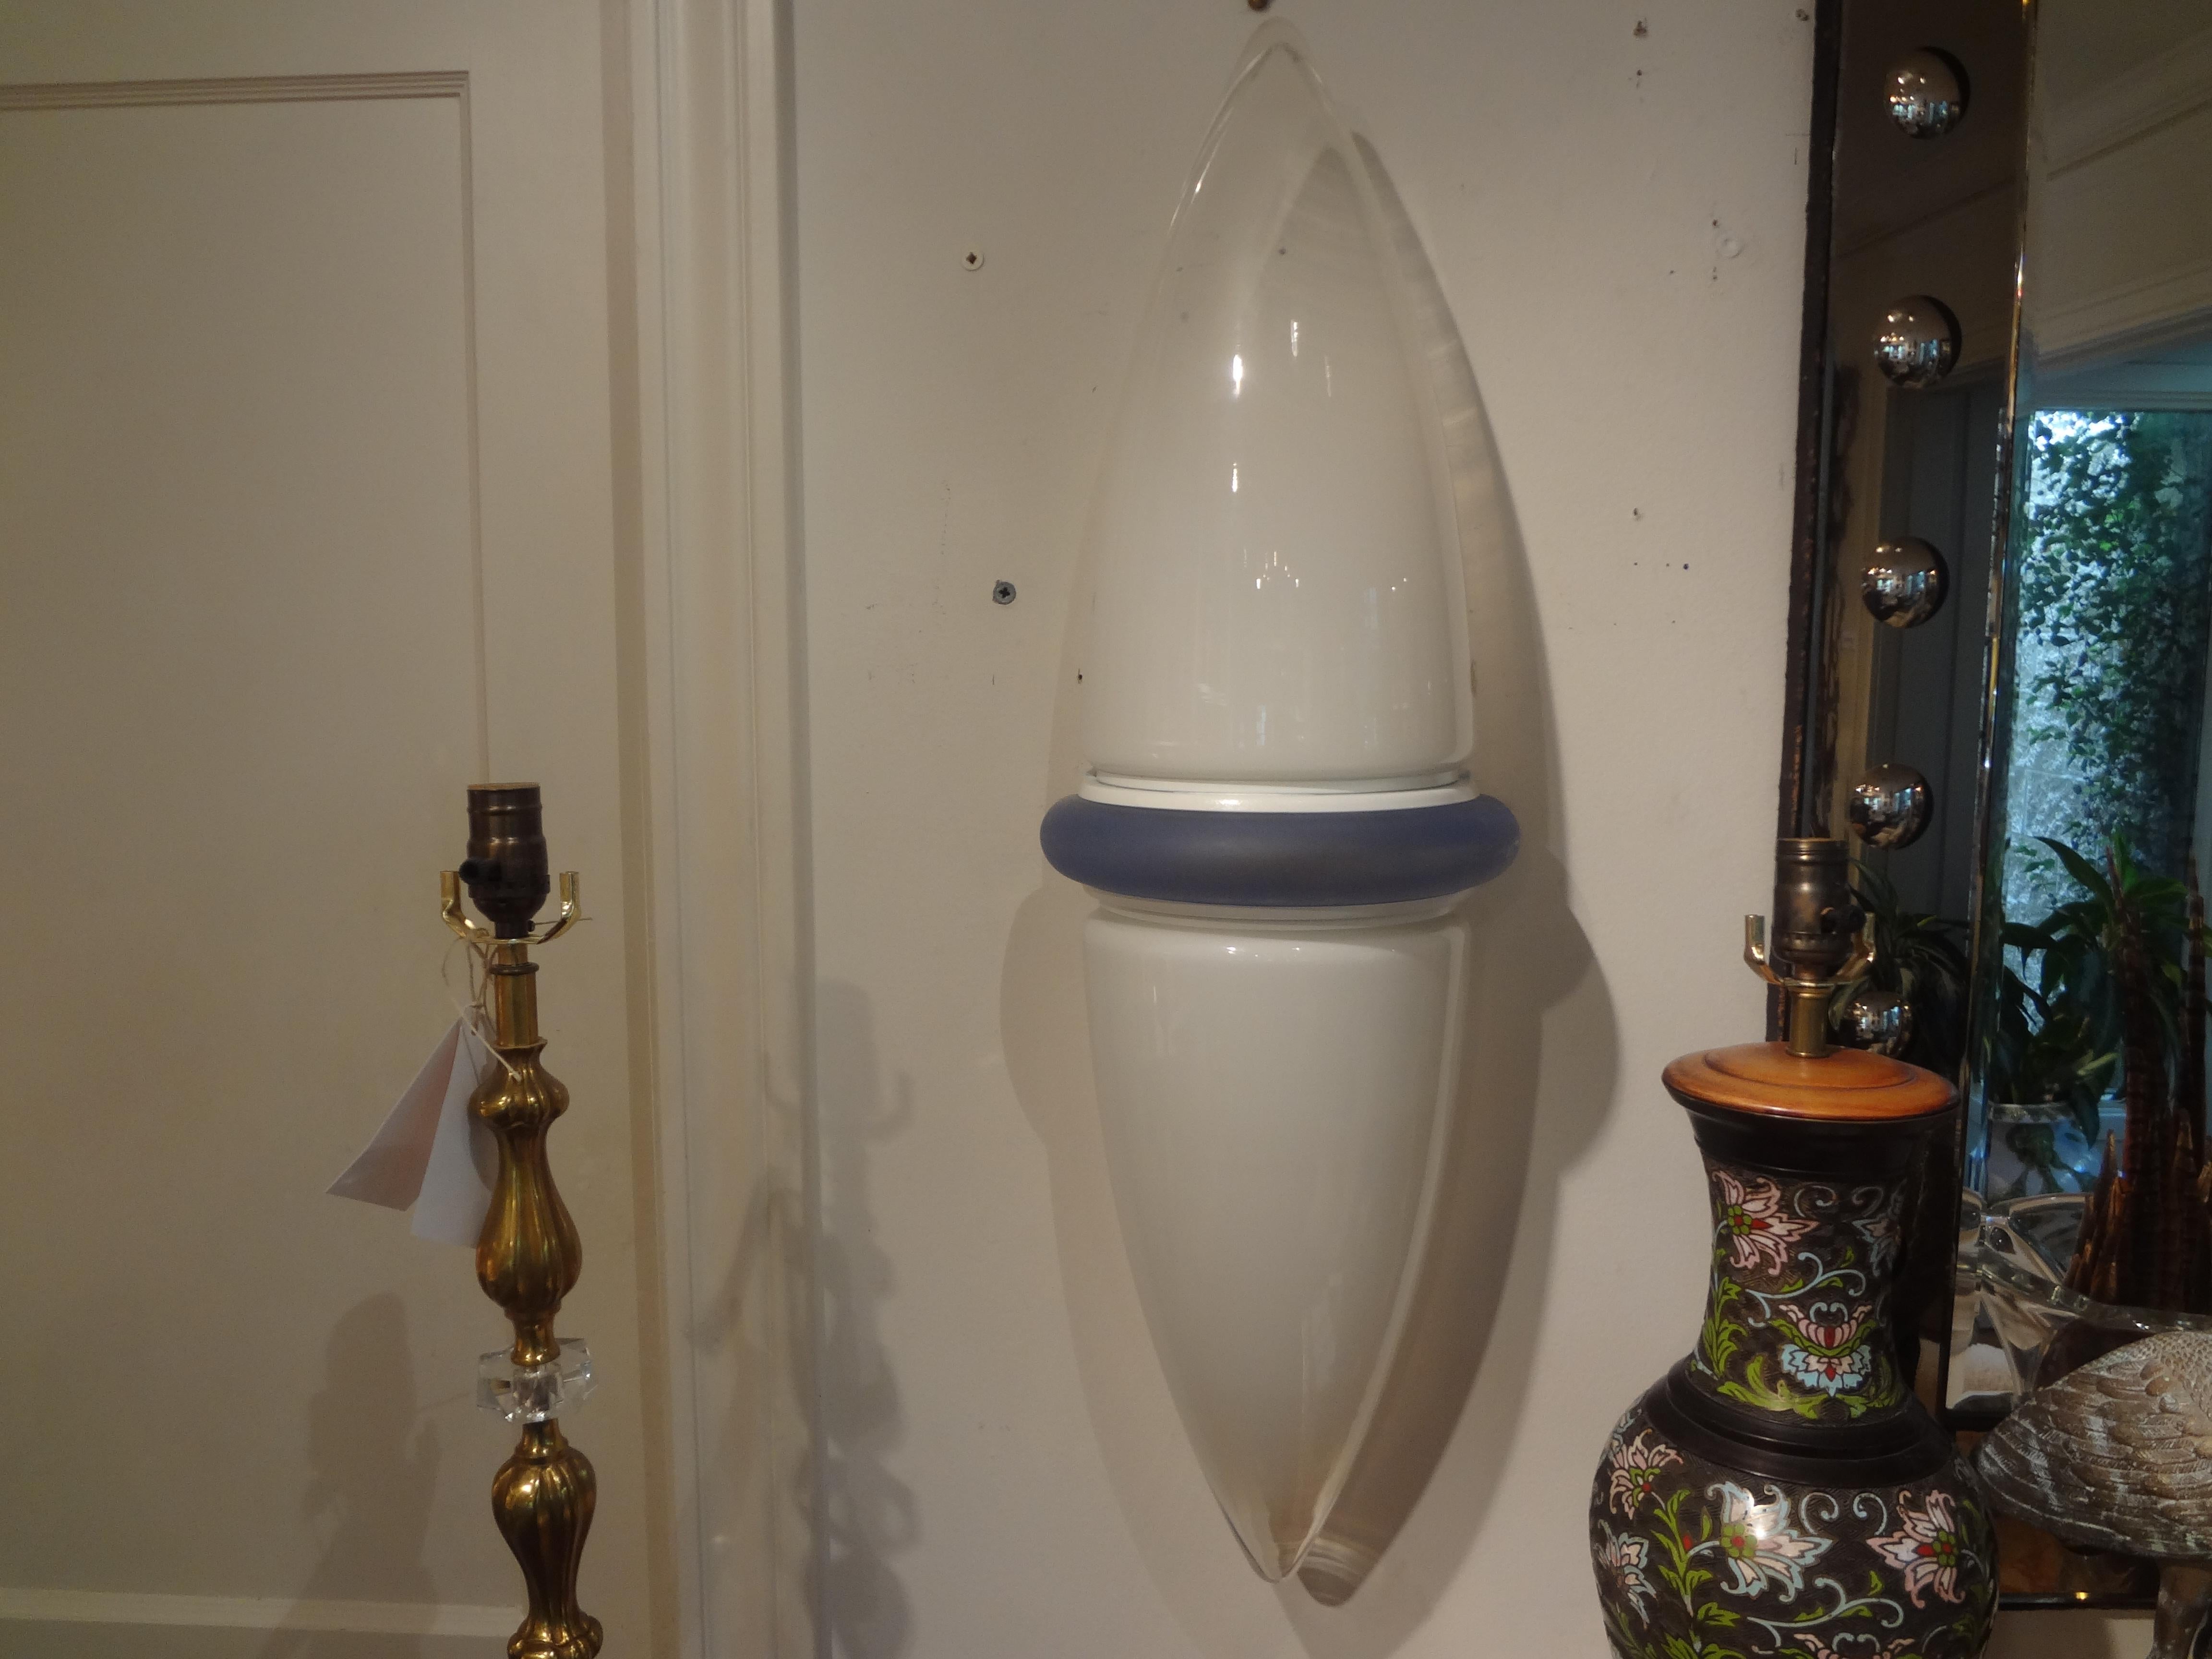 Pair Of Post Modern Murano Glass Sconces. This Monumental Pair Of Post Modern Murano Sconces By Vetro Eseguito Have Been Newly Wired With New Sockets.
Stunning And Most Unusual!